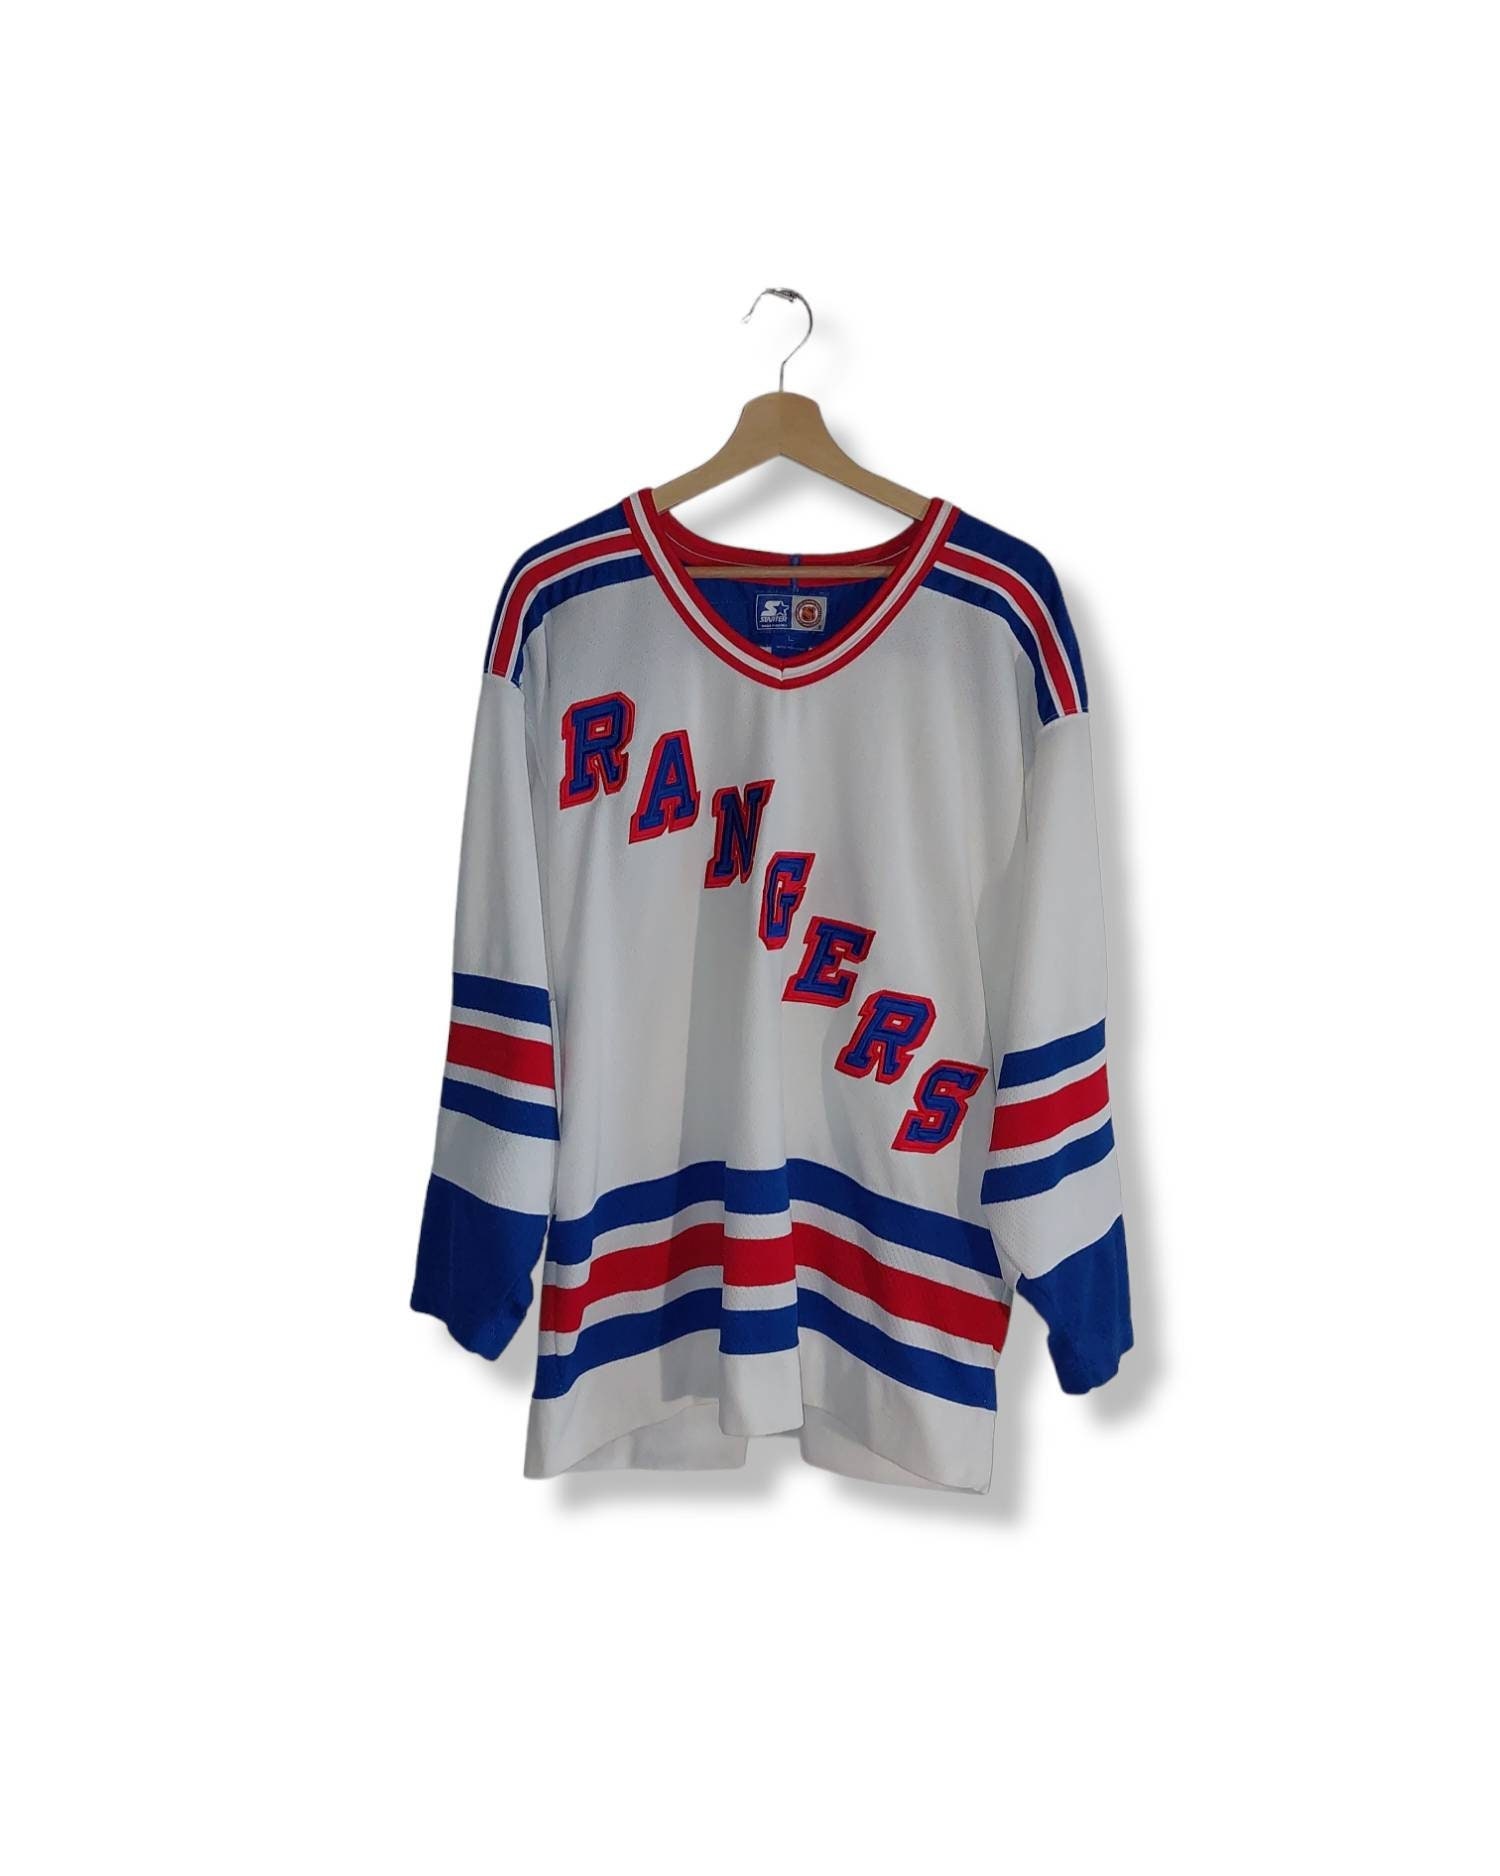 Youth Vintage Starter NHL New York Rangers Jersey (Youth S/M